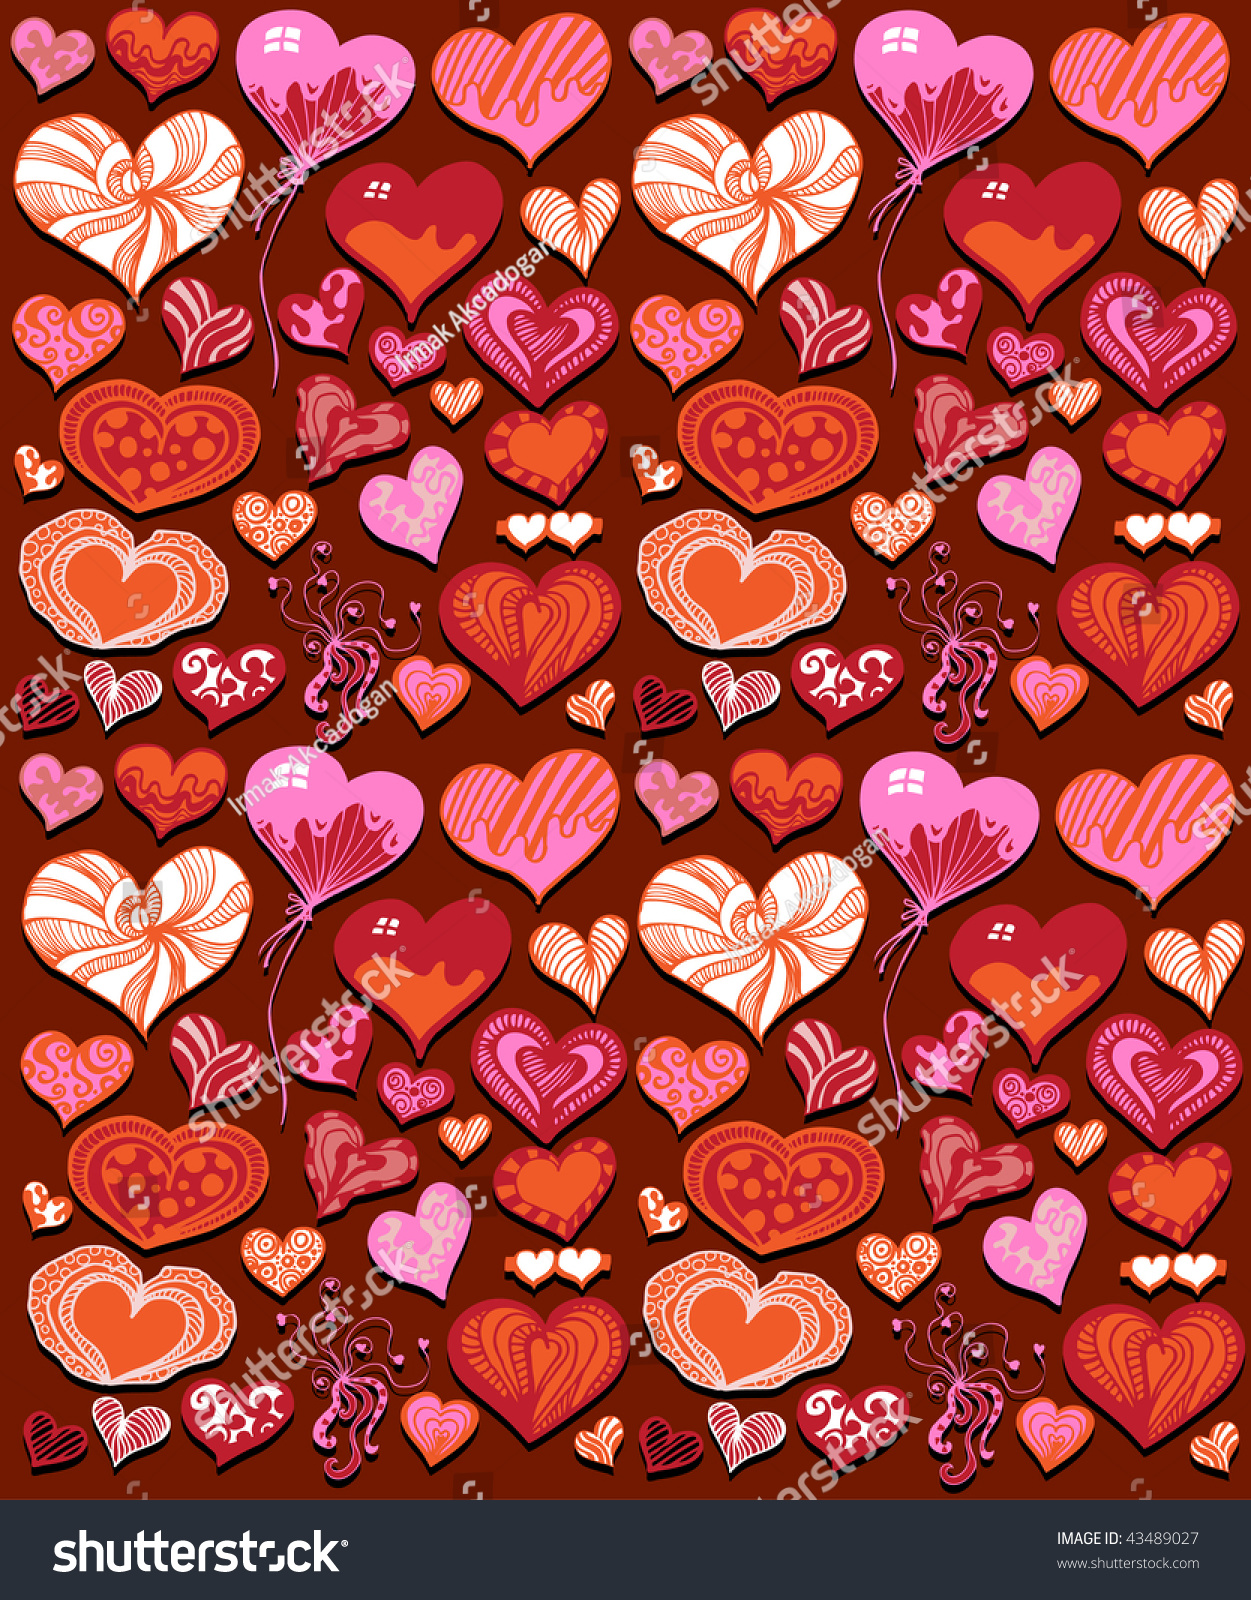 Wallpaper Design With Cute Hearts Stock Vector